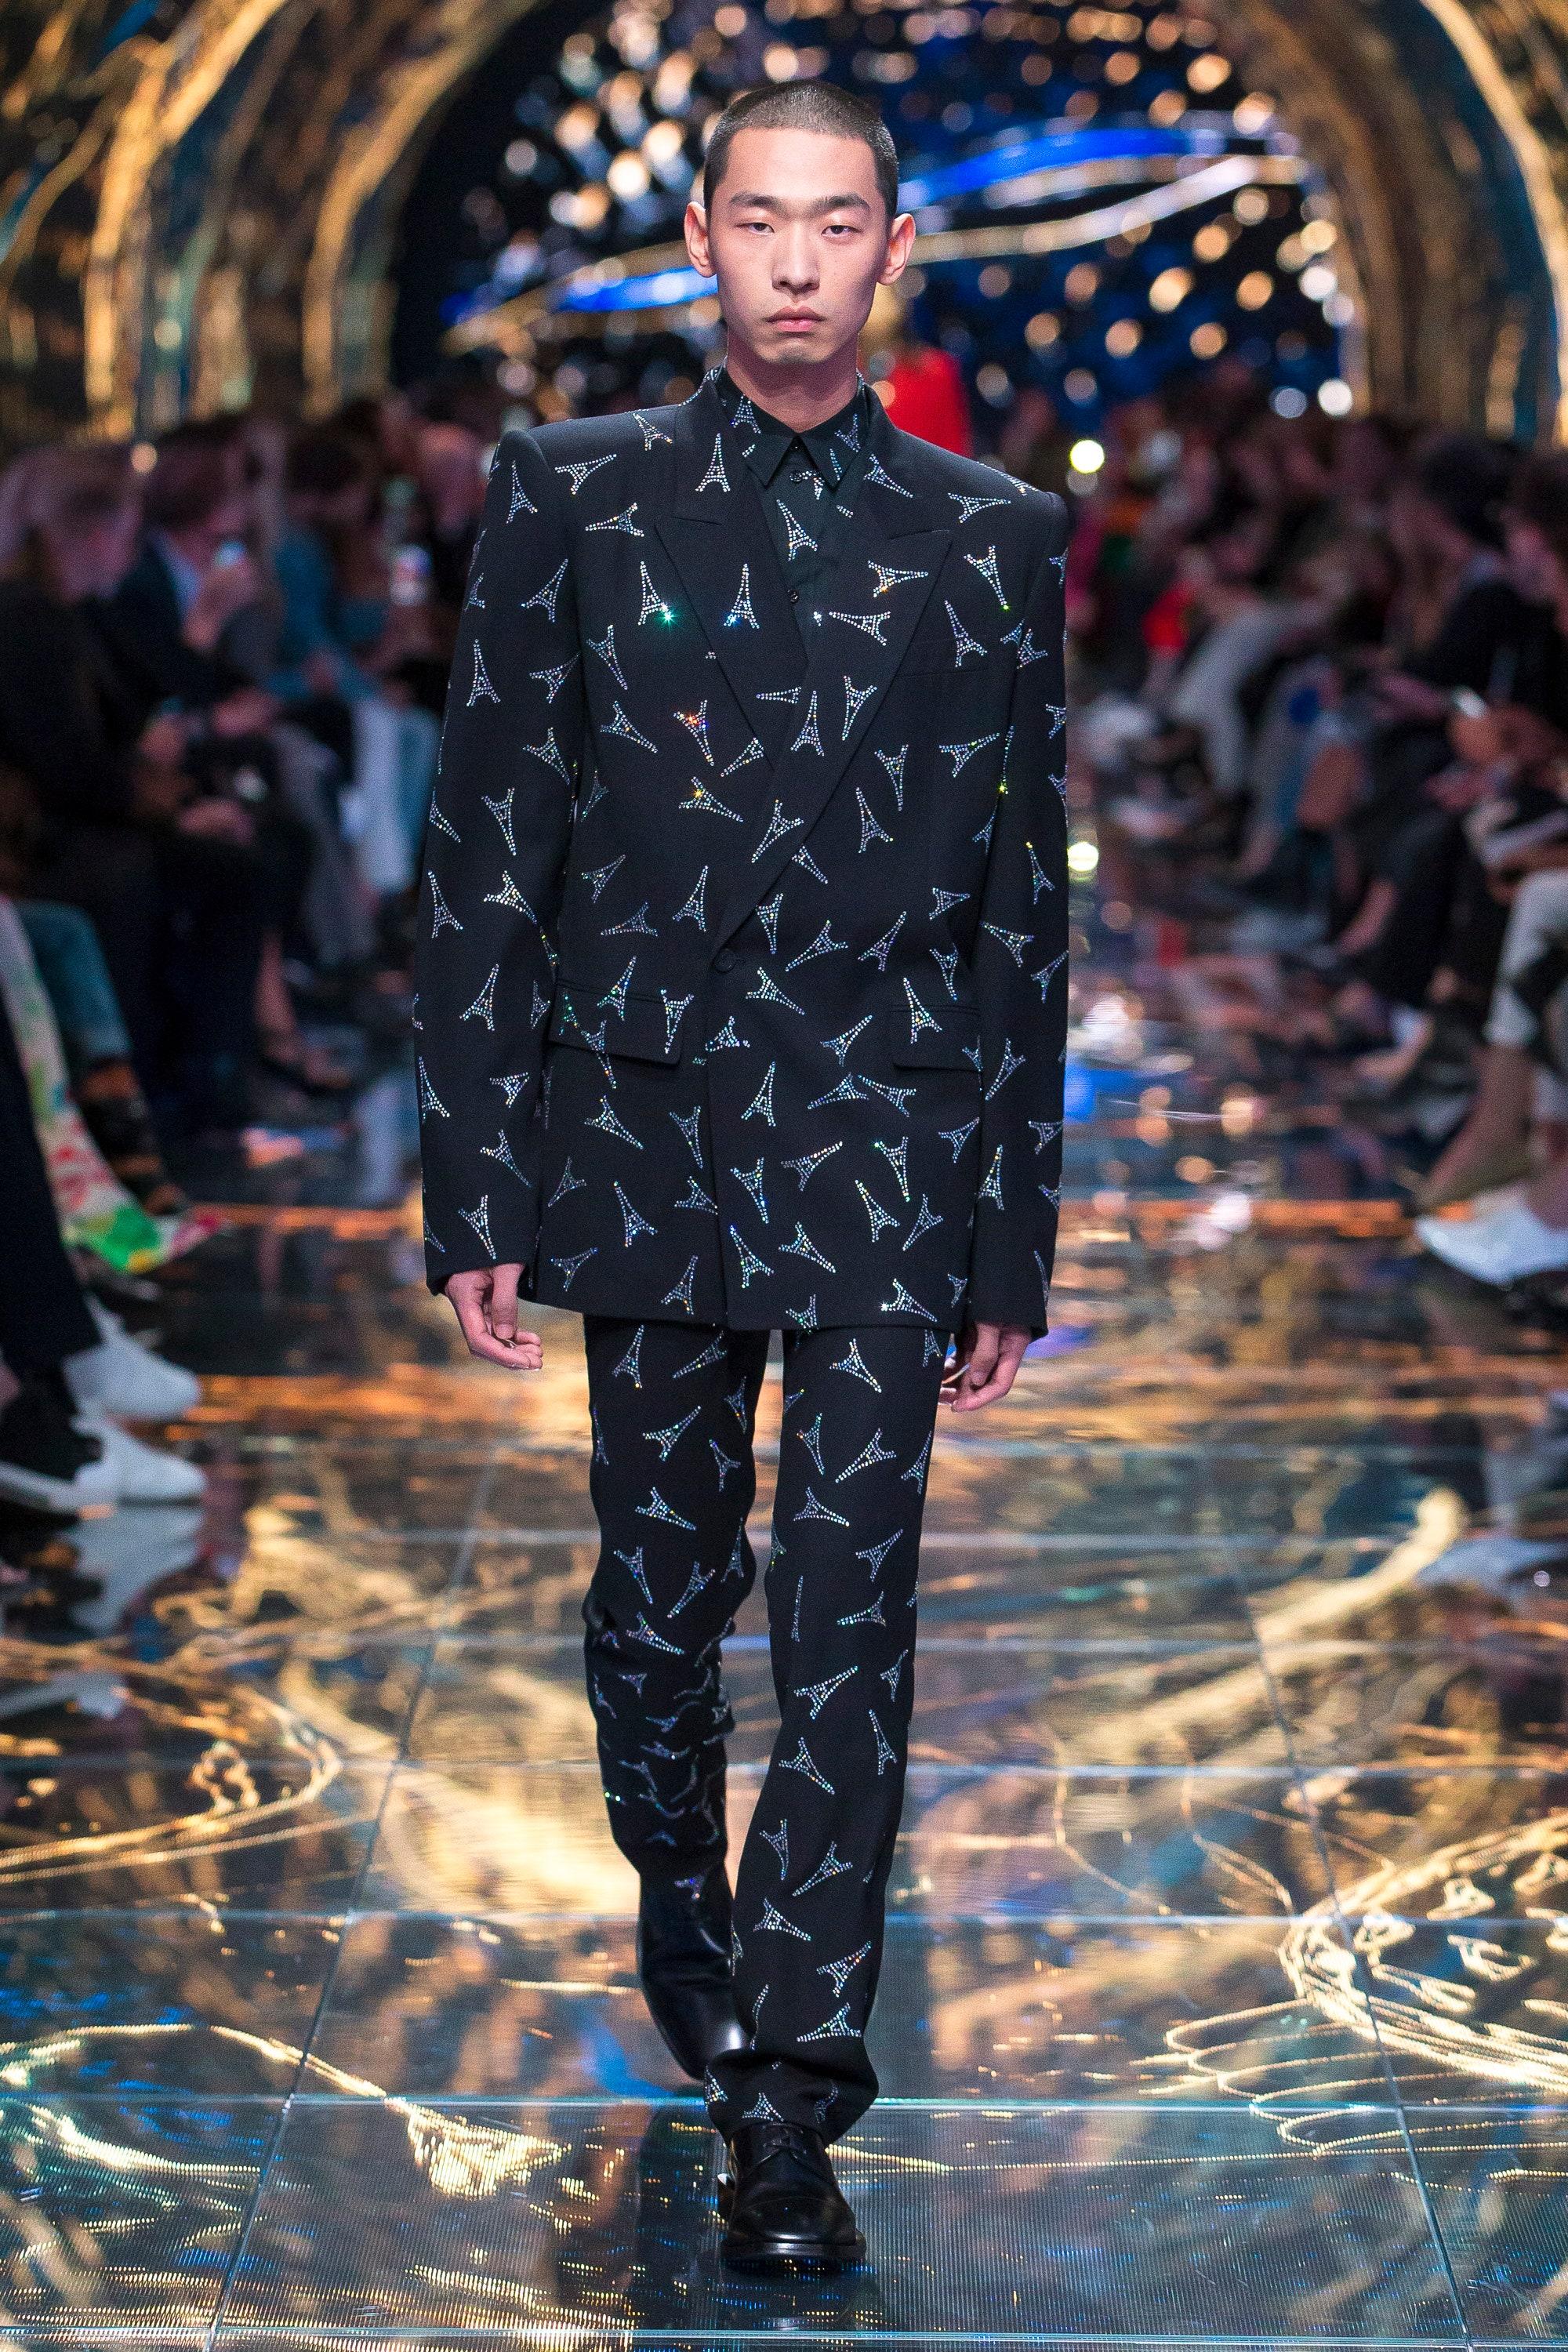 new BALENCIAGA Demna 2019 Runway Eiffel Tower crystal Power blazer IT48 M
Reference: TGAS/C00421
Brand: Balenciaga
Designer: Demna
Collection: Fall Winter 2019 Runway
Material: Viscose
Color: Black
Pattern: Abstract
Closure: Button
Extra Detail: